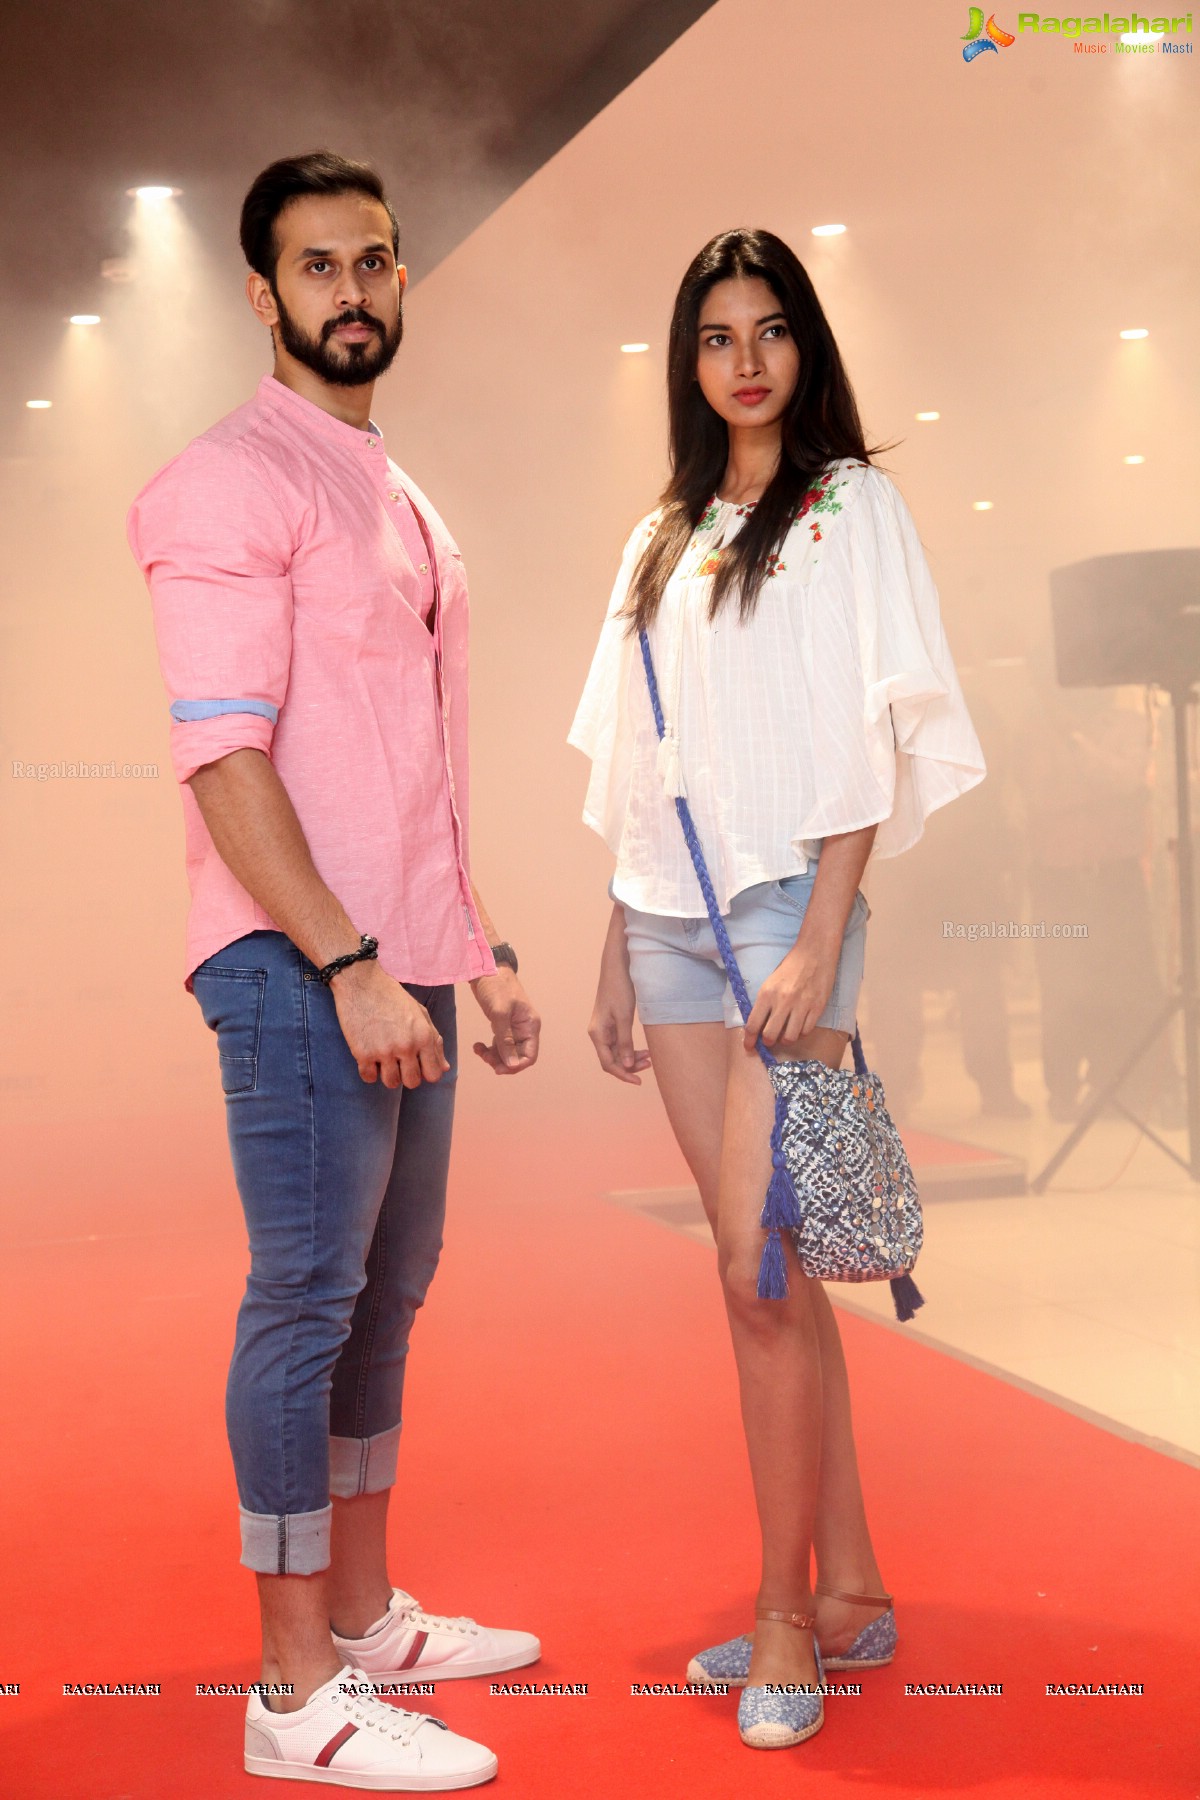 Sree Mukhi launches the MAX Summer Look-book and Summer 2017 Collection in Hyderabad